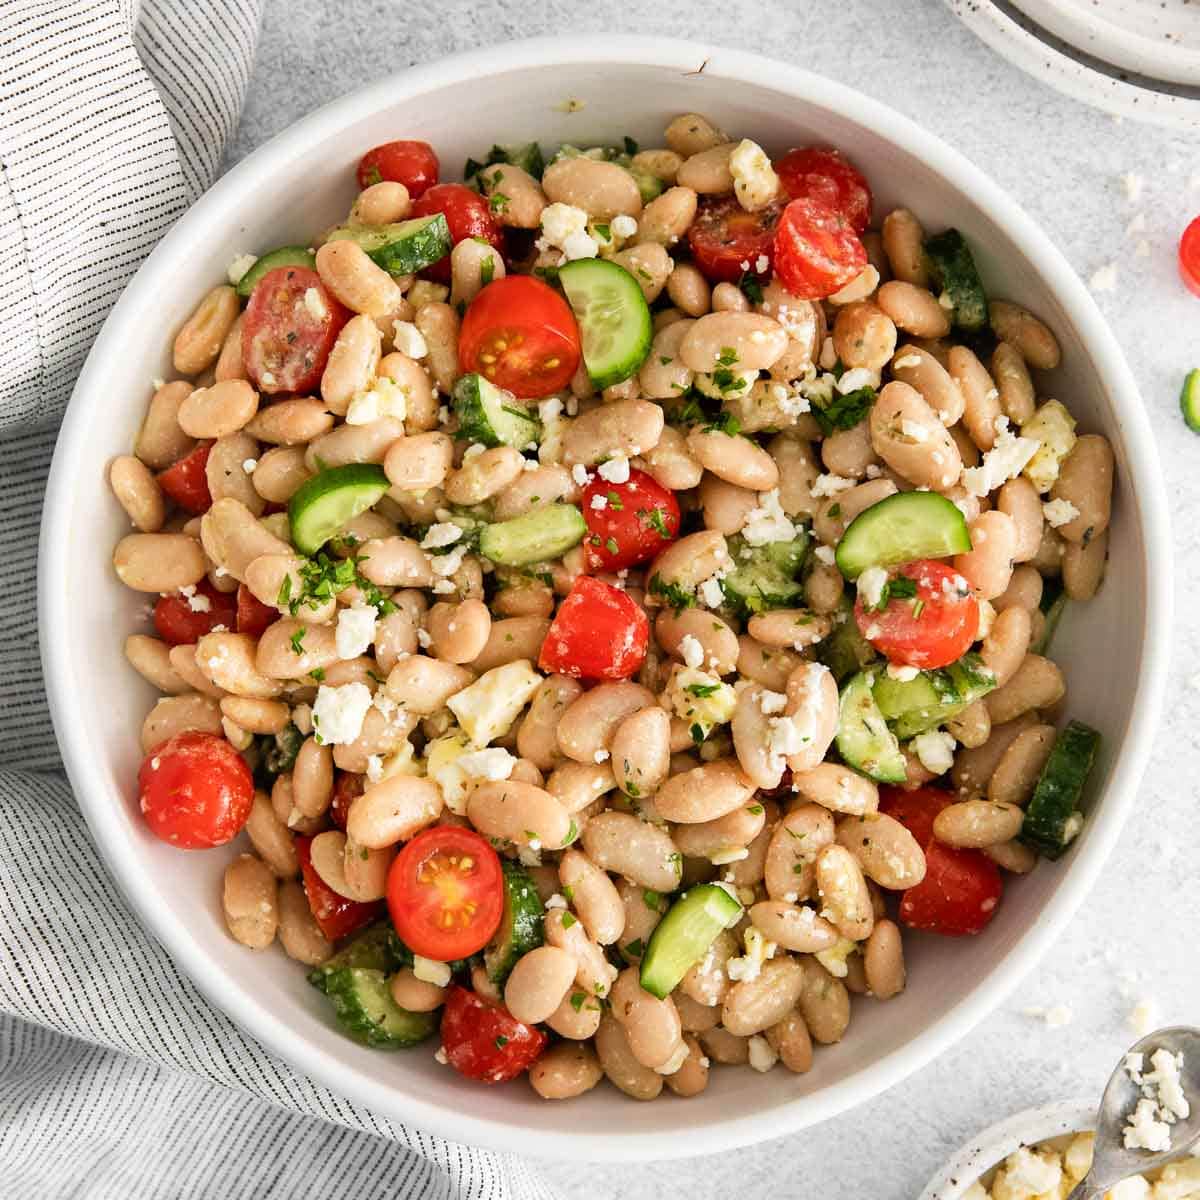 white bean salad with cherry tomatoes, cucumbers, feta cheese and greek spices in a white serving bowl